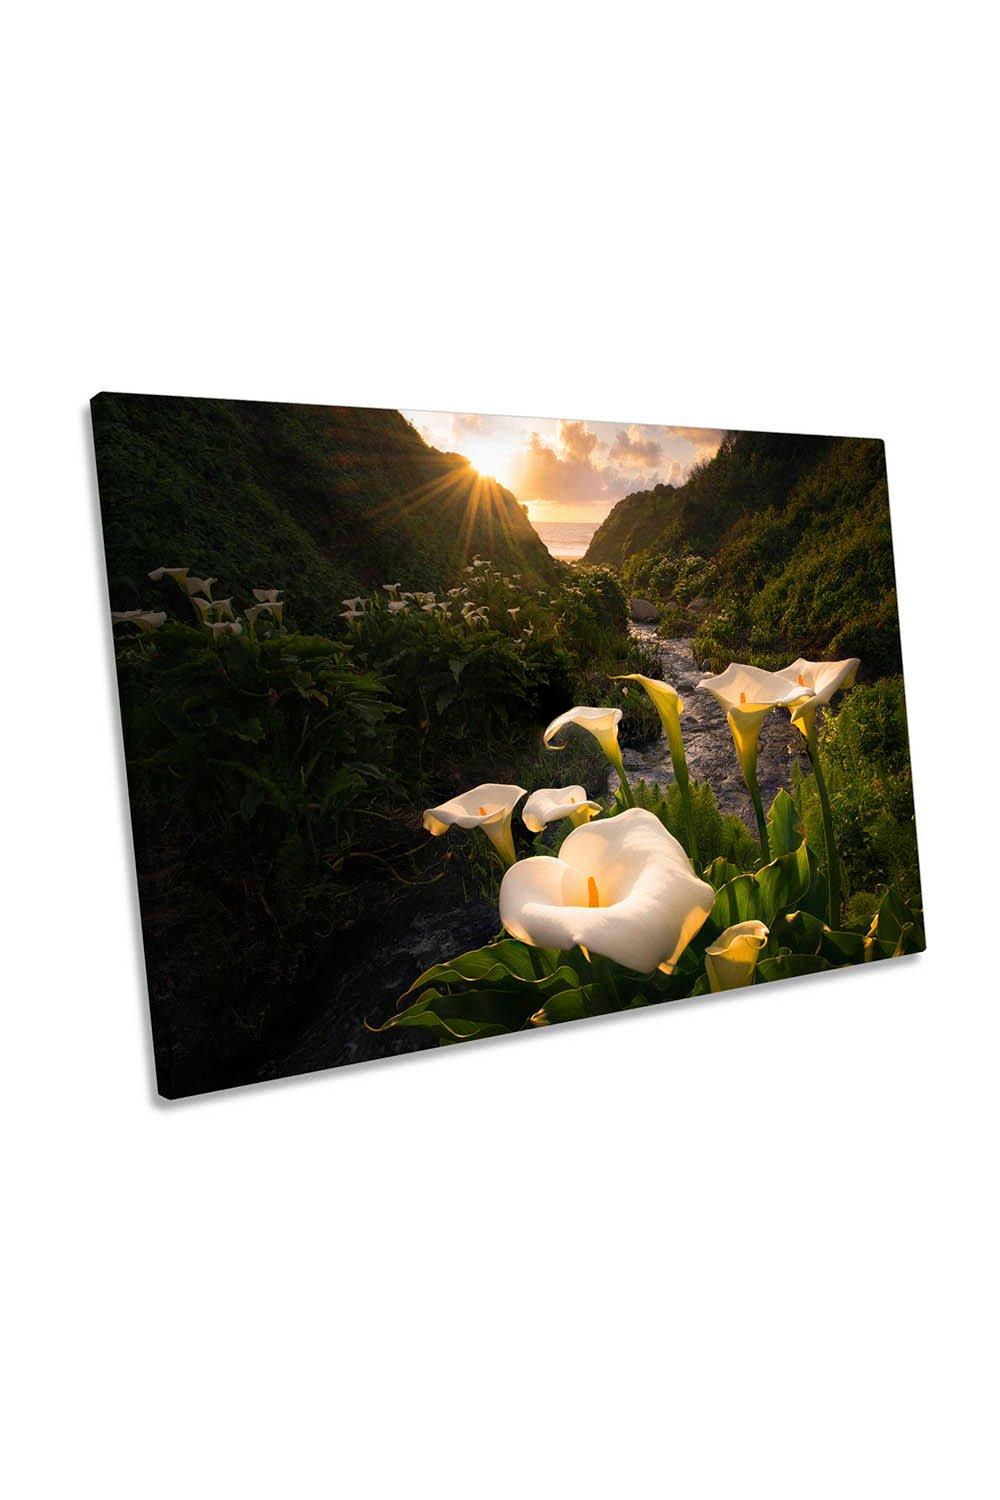 Calla Lily Flowers at the Coast Sunset Canvas Wall Art Picture Print